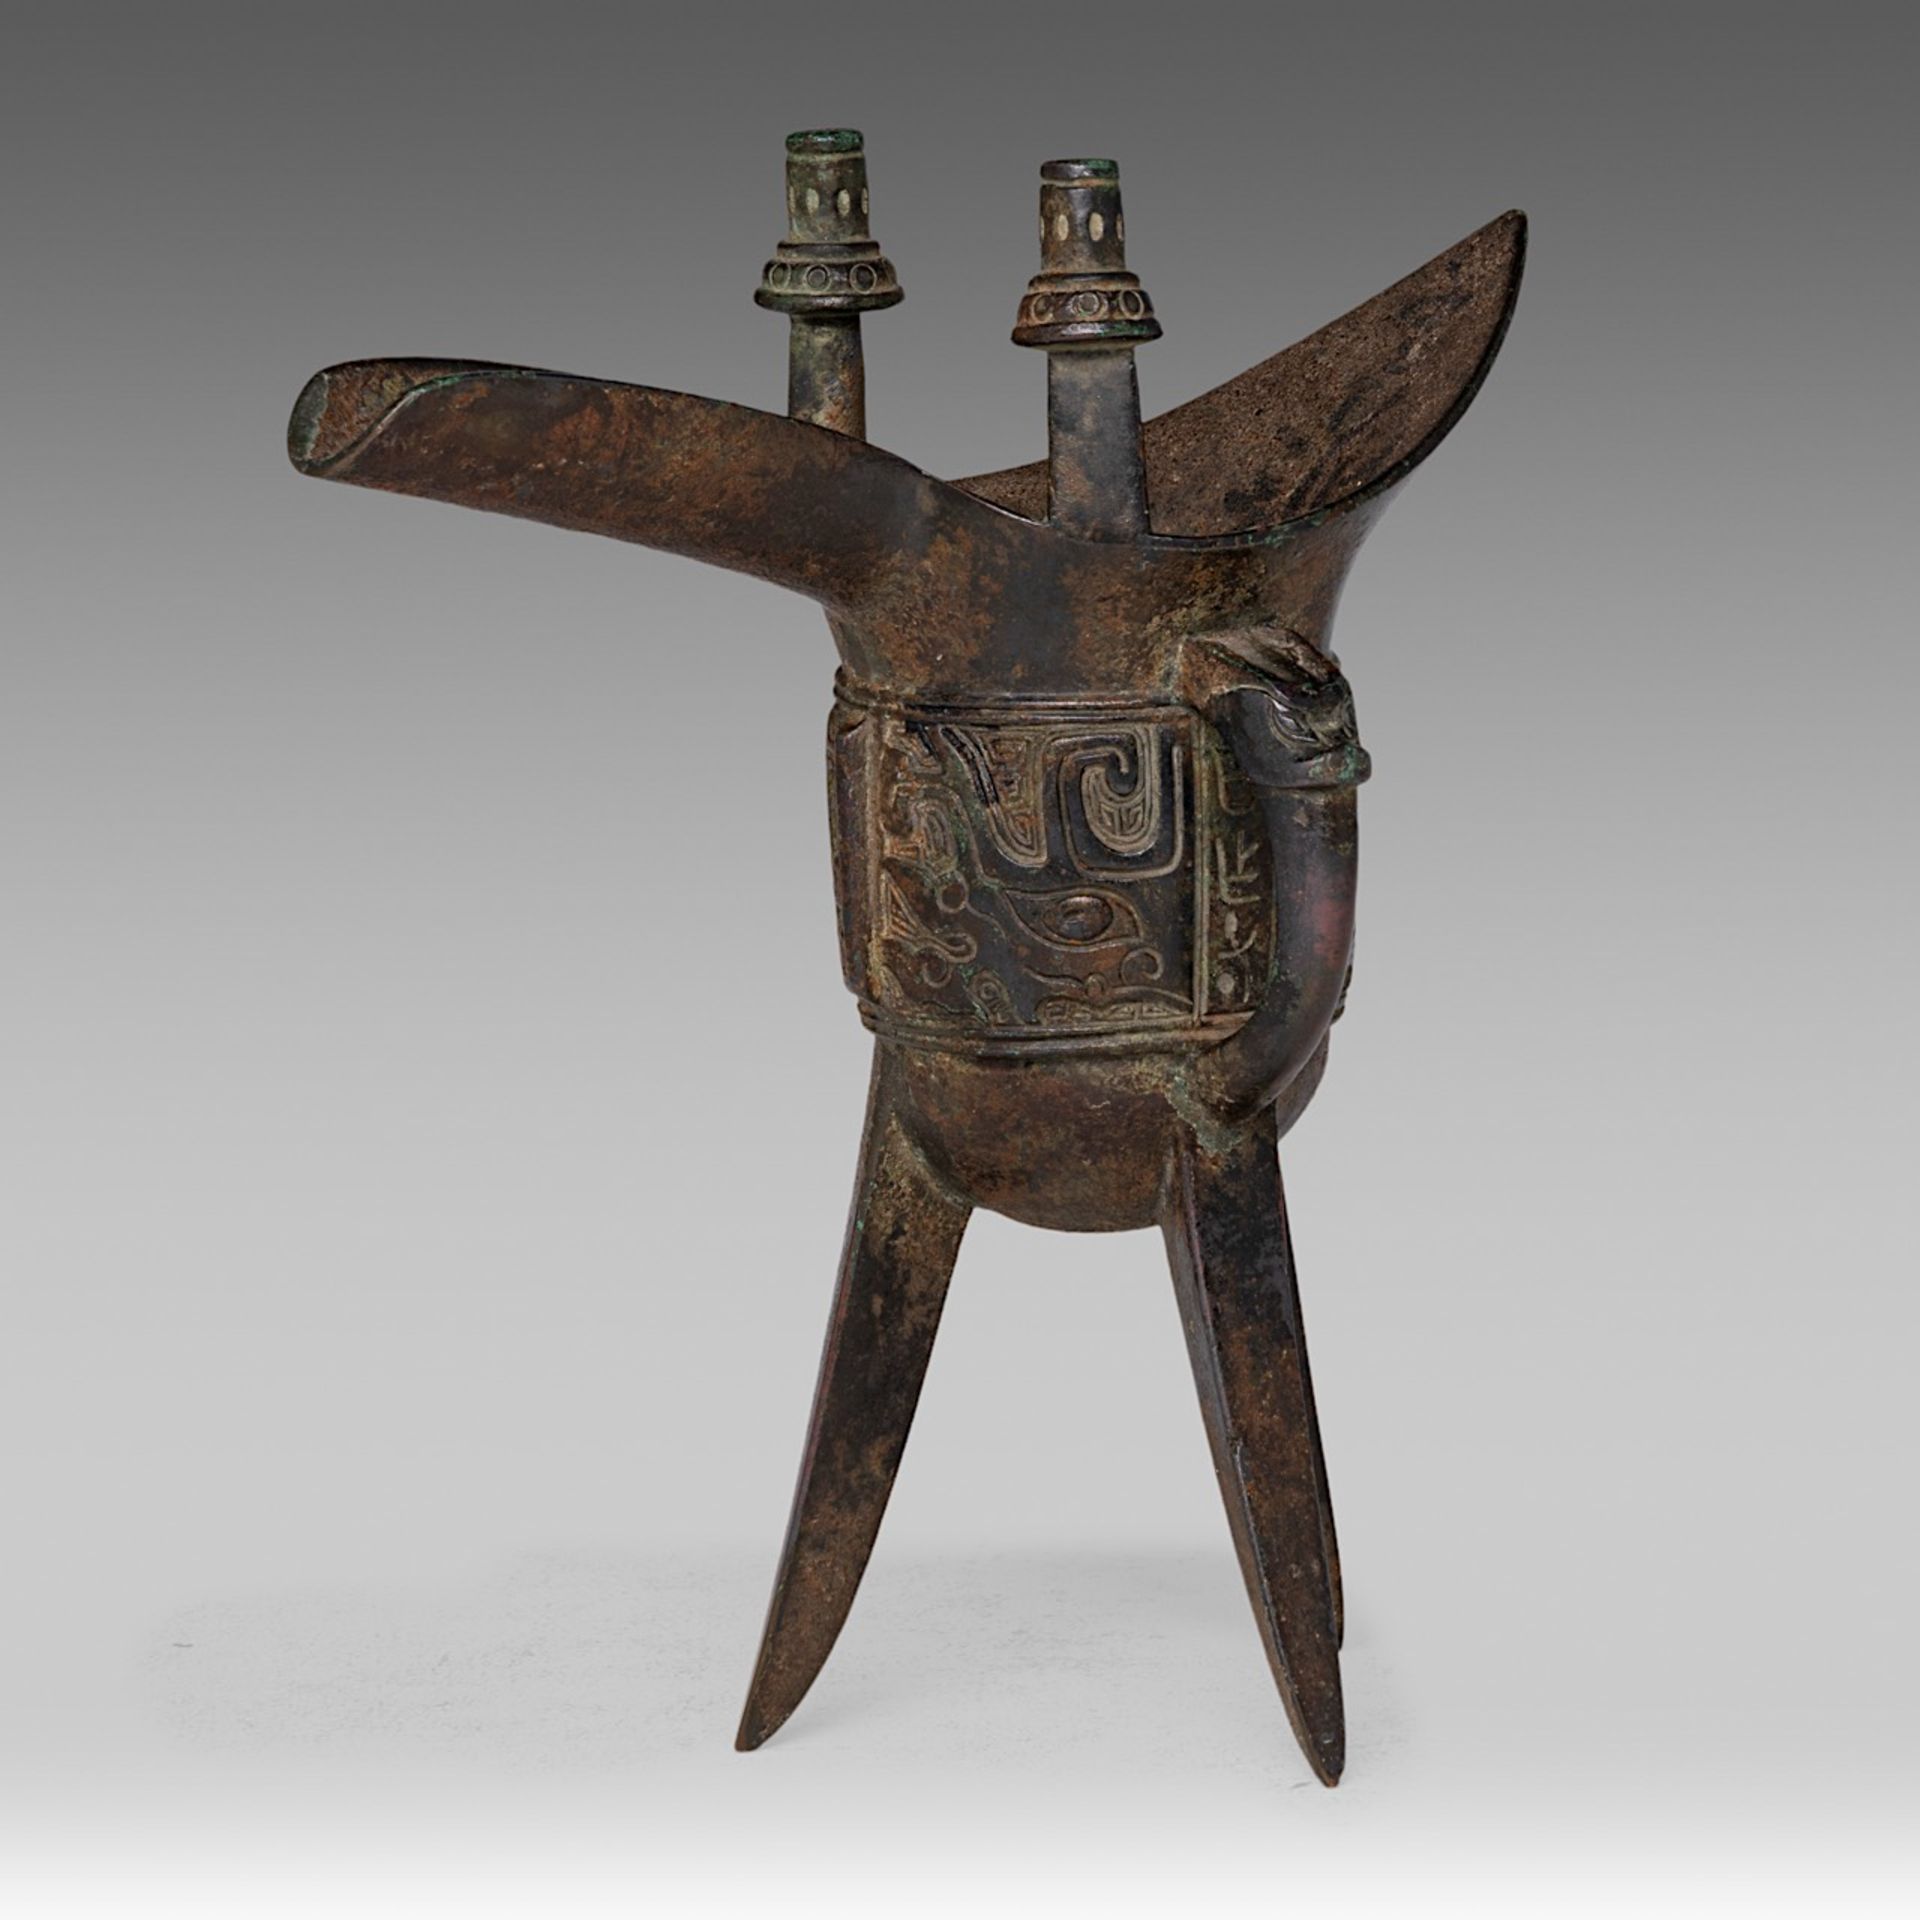 A Chinese archaistic ritual bronze 'Jue' vessel, Ming dynasty, H 19,2 - L 17,3 cm - Image 3 of 7